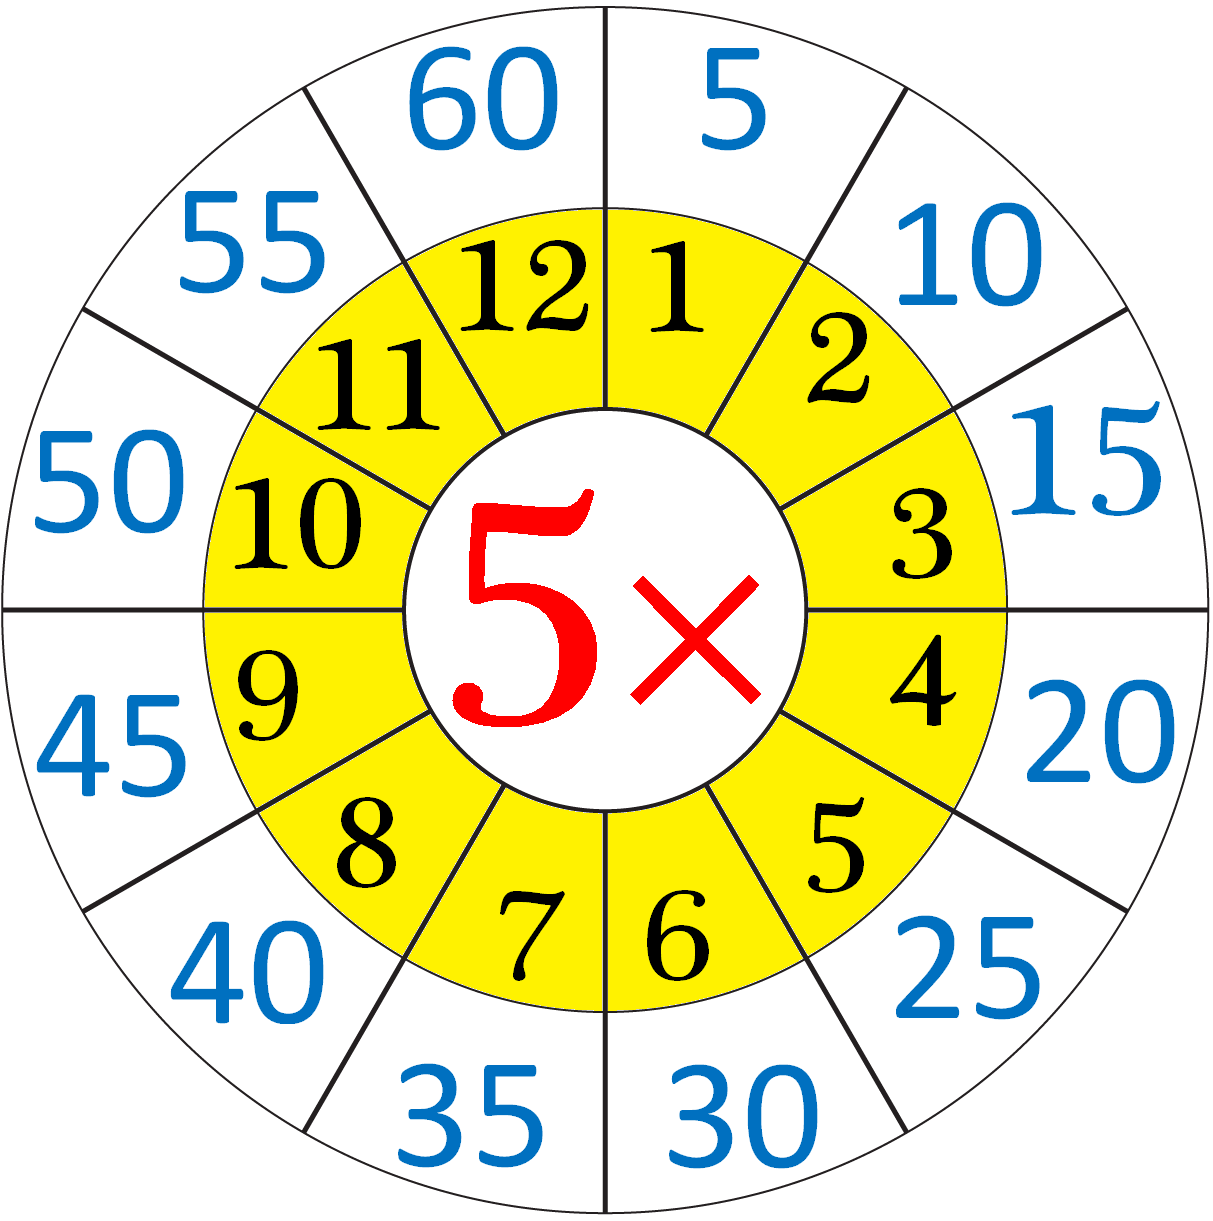 multiplication-table-of-5-read-and-write-the-table-of-5-5-times-table